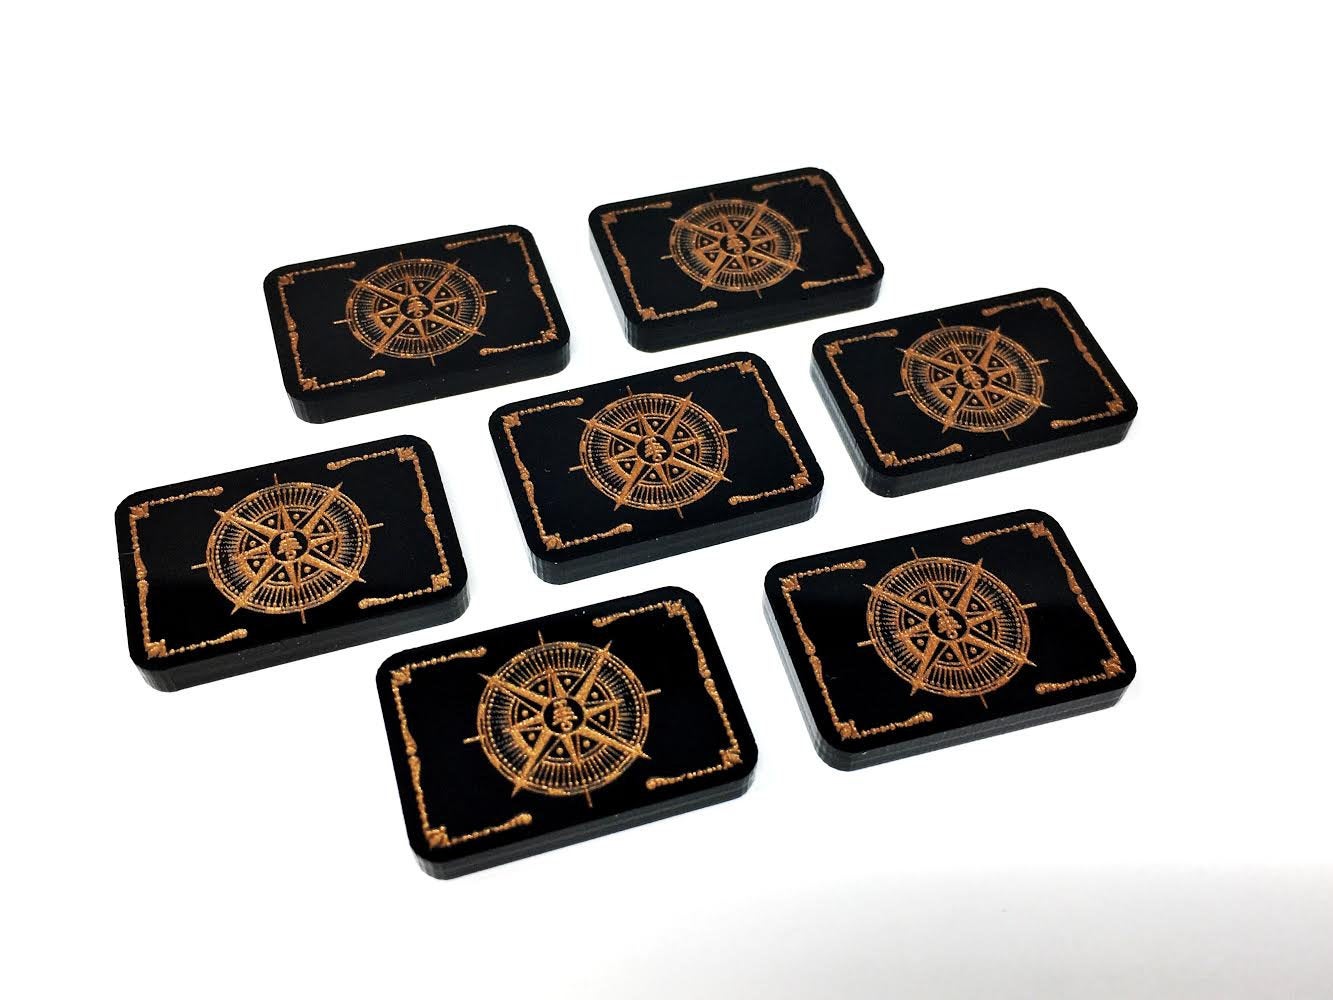 Innsmouth Conspiracy Set (double sided Key And Flood tokens) for Arkham Horror LCG